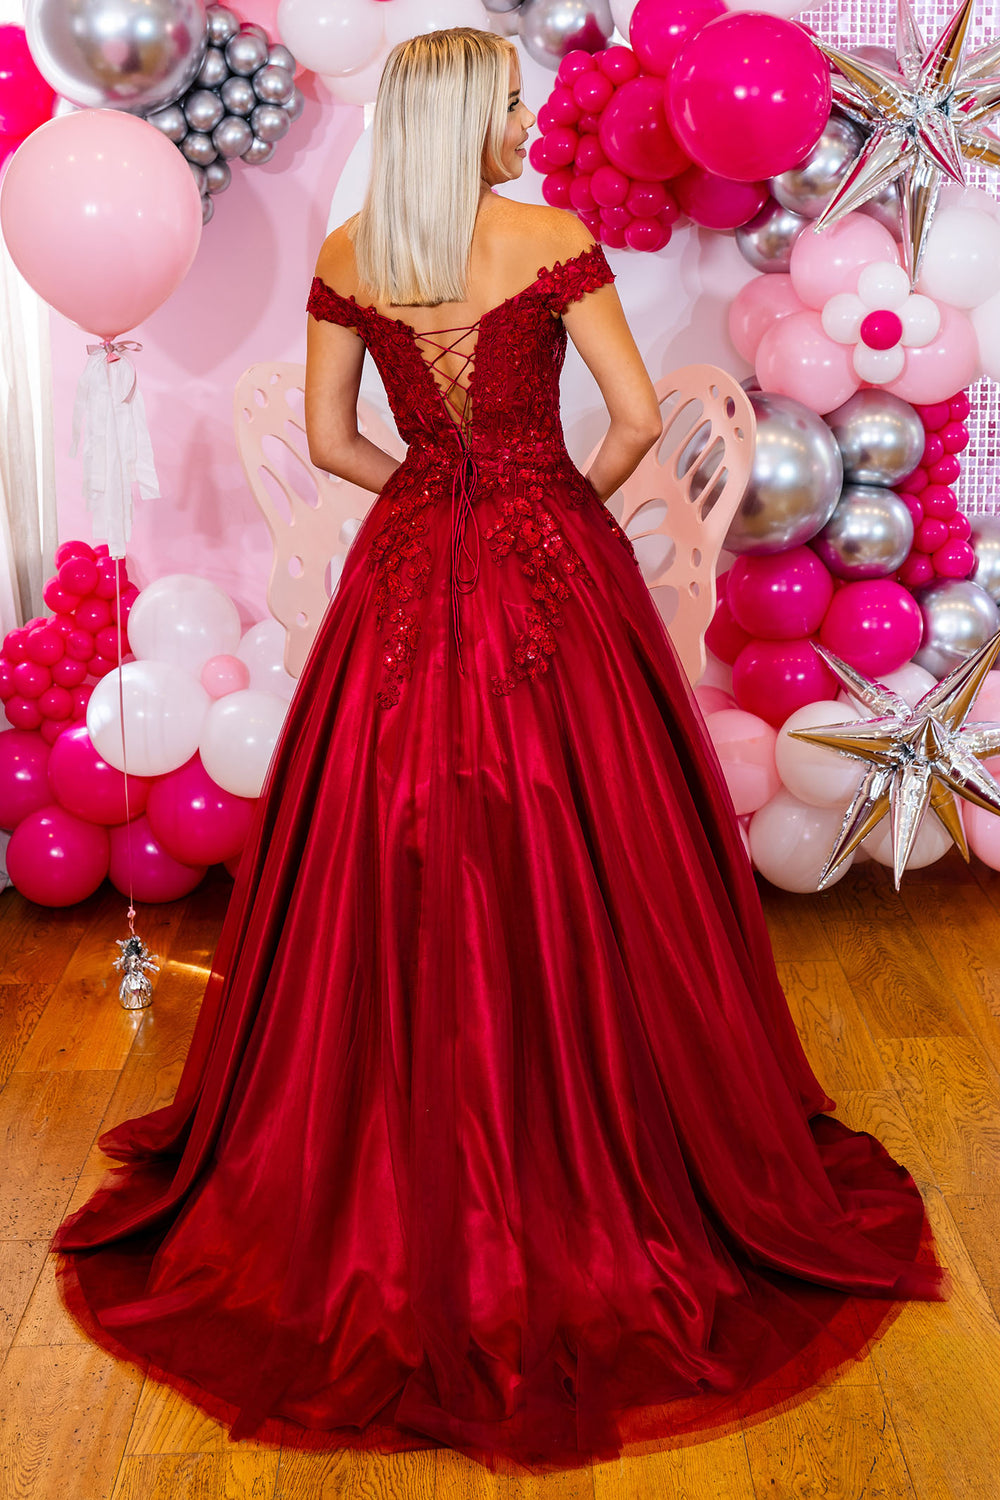 Prom Frocks PF1002 Burgundy Red Off The Shoulder Prom Ballgown - Dotique Chesterfield